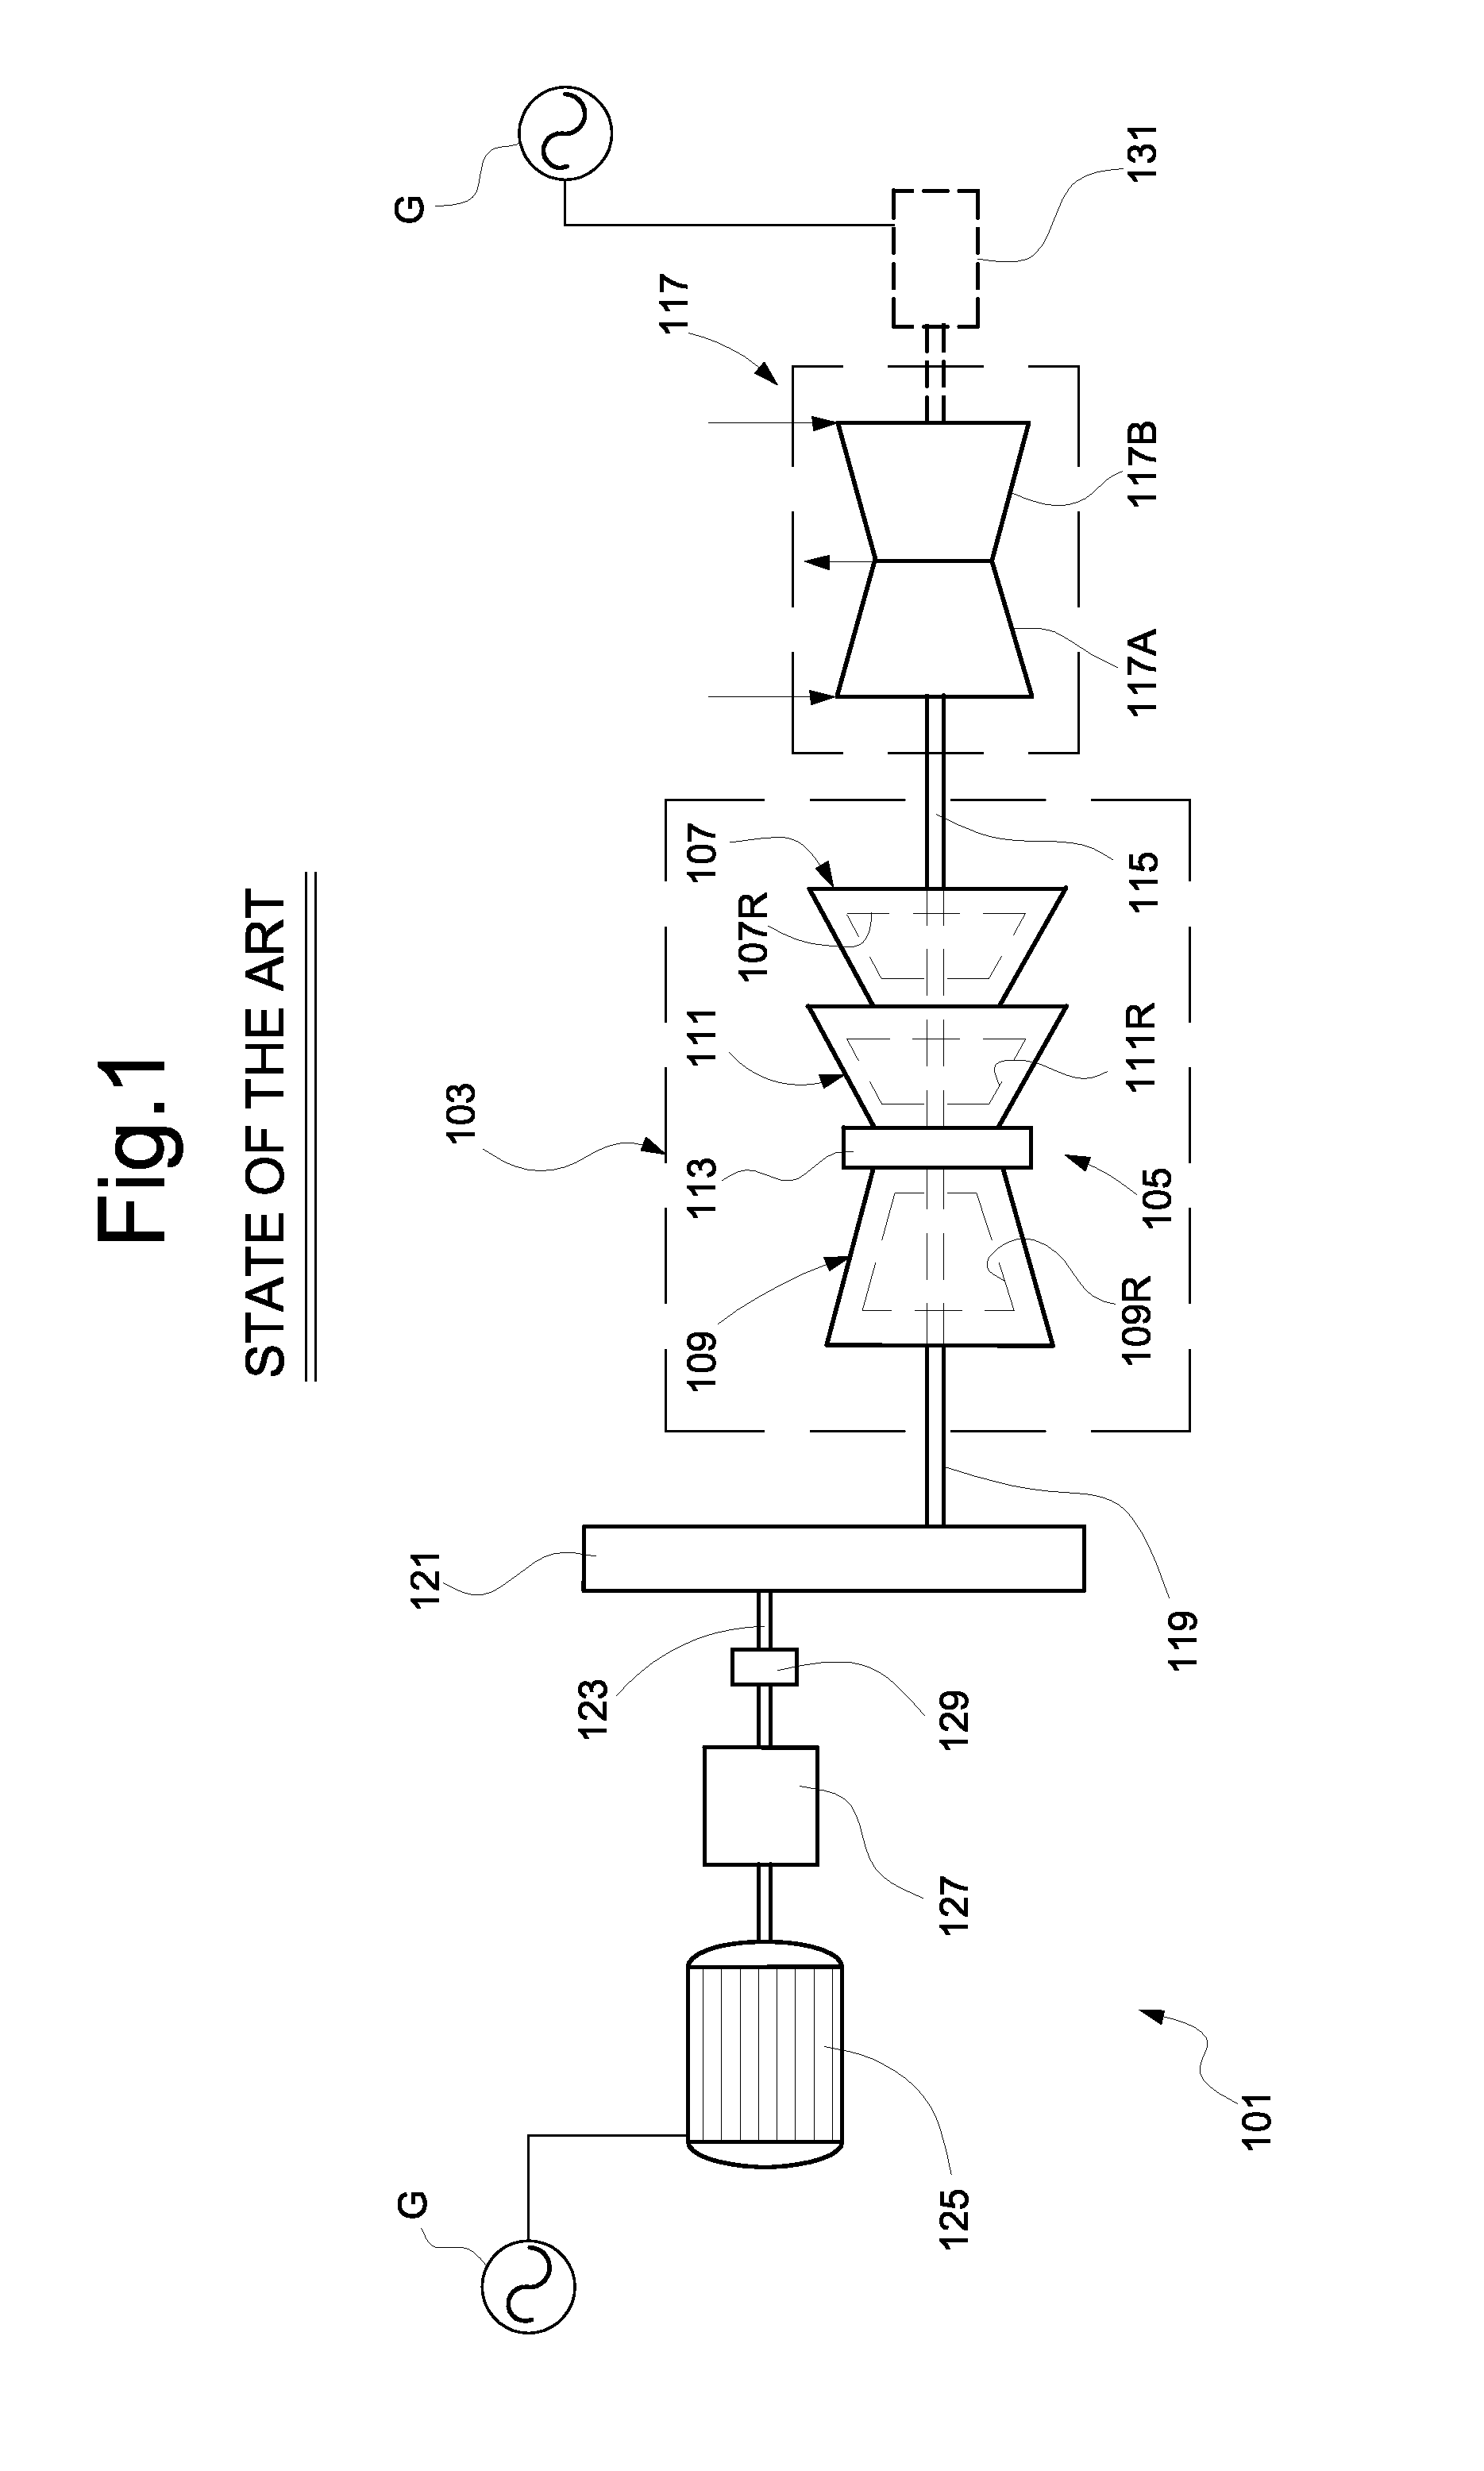 Gas turbines in mechanical drive applications and operating methods